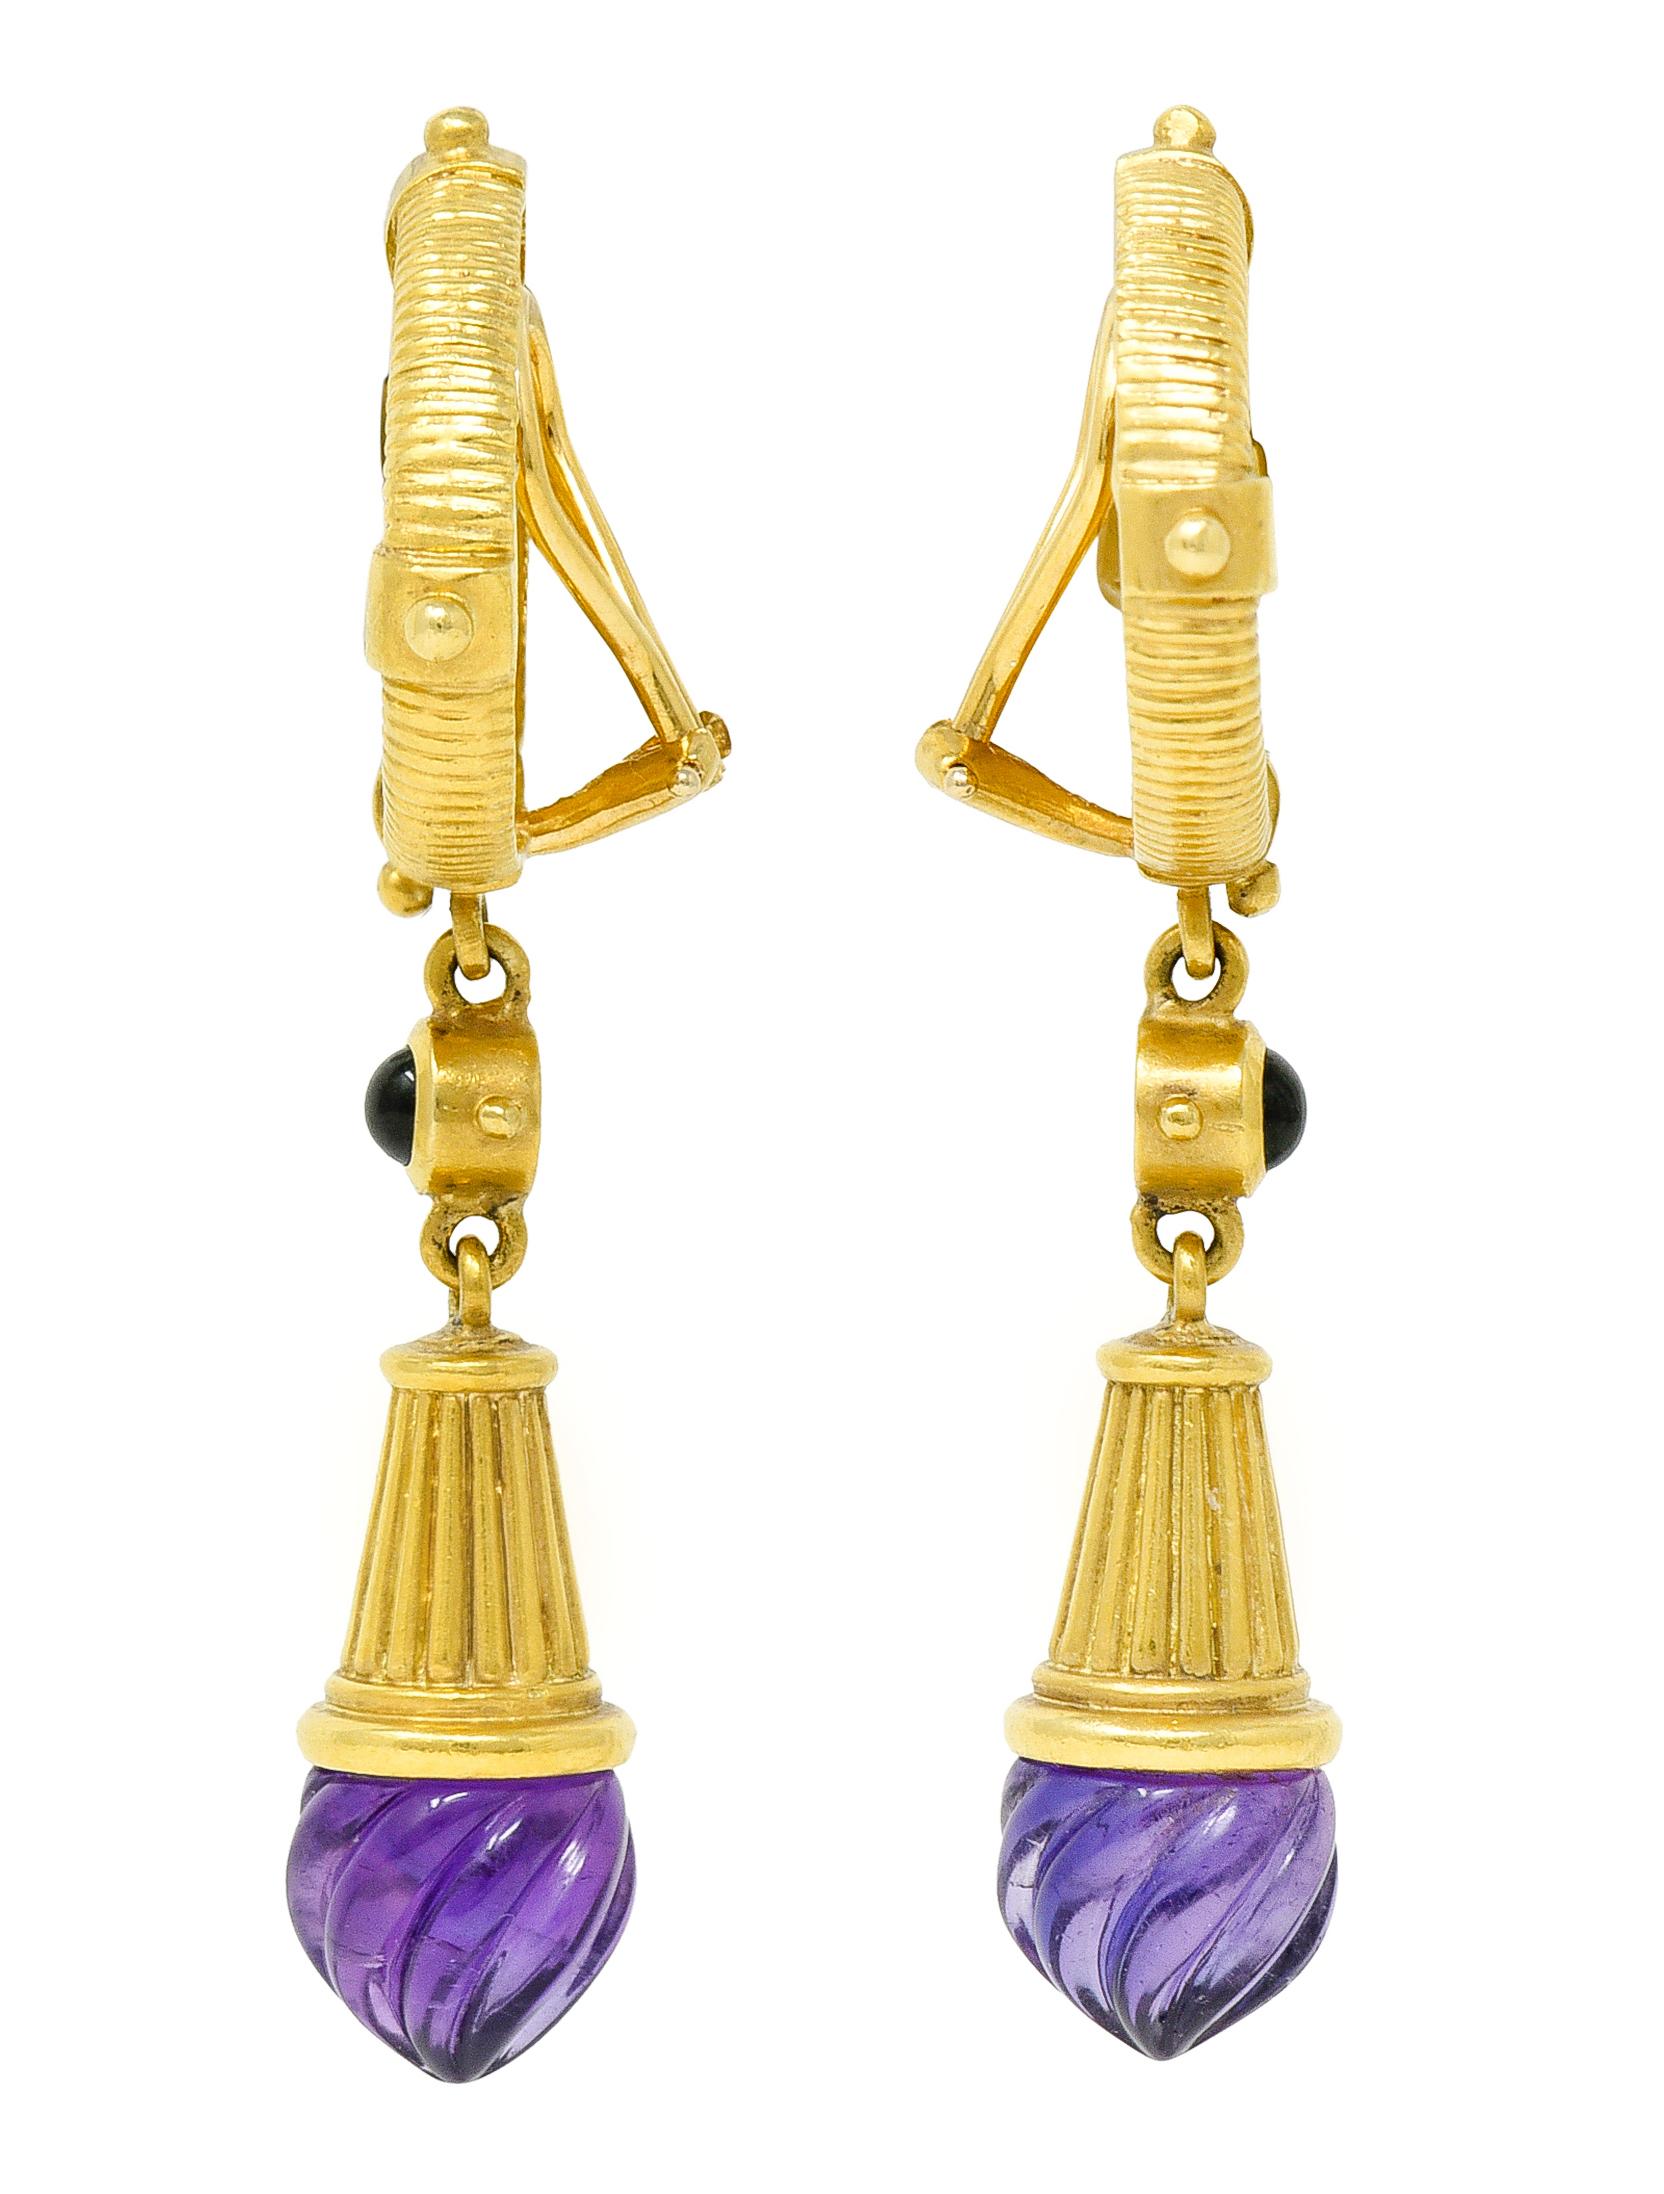 Ear-clip earrings feature a cameo of the Greek figures Pegasus and Bellerophon - with a ridged surround

Suspending articulated drops as deeply grooved gold speculum forms terminating with amethysts

Spiral carved and transparent purple in color